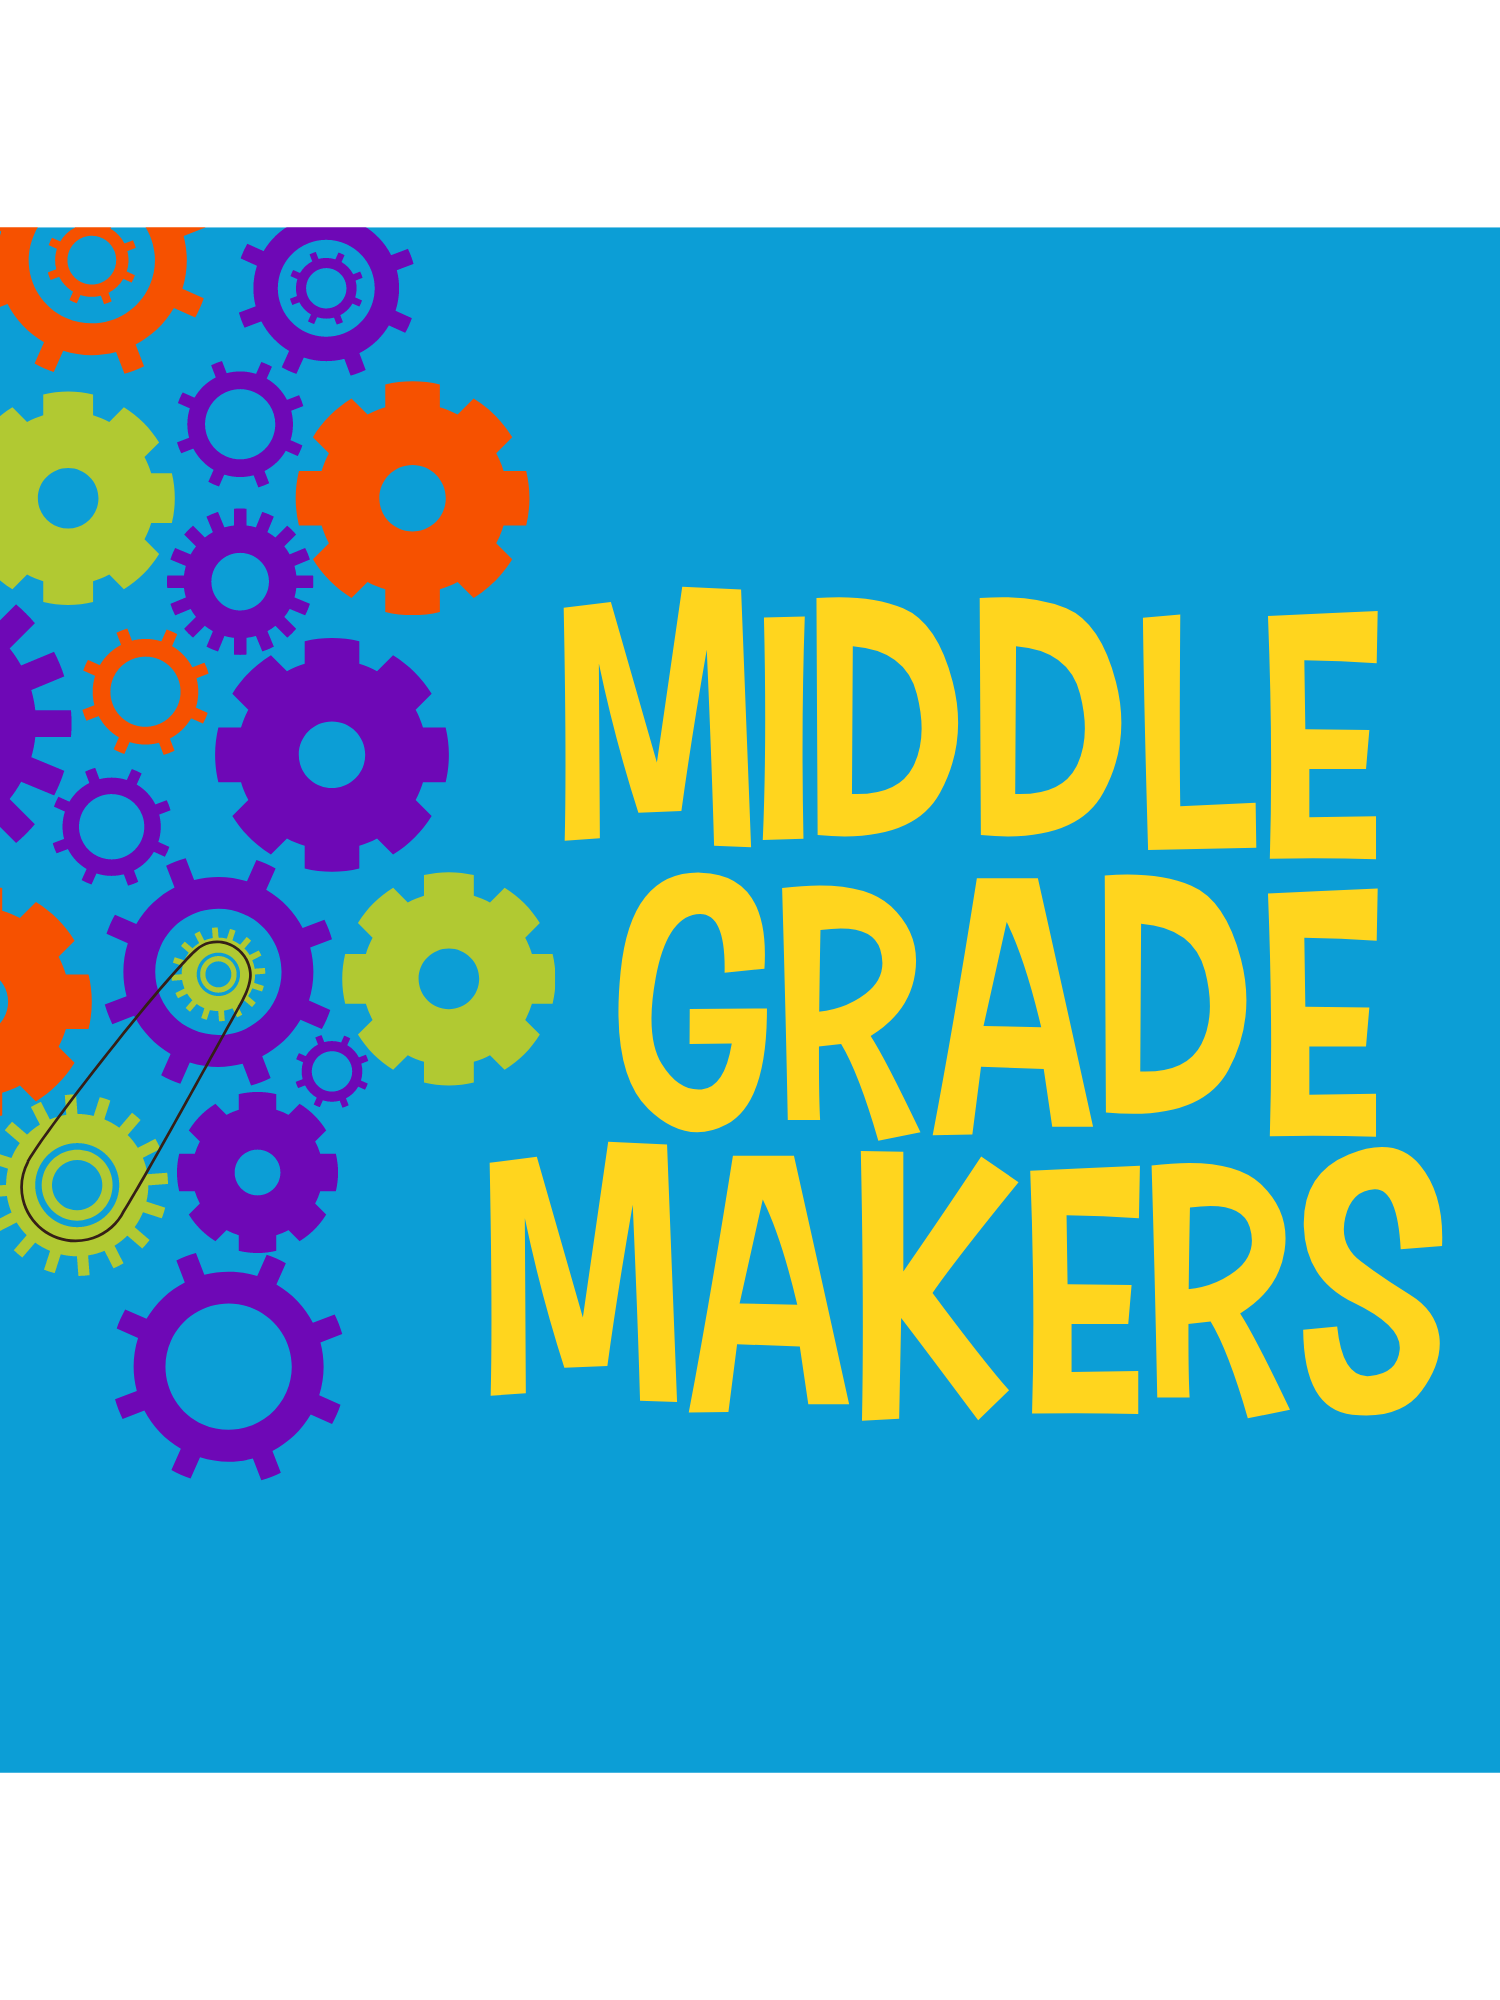 Middle Grade Makers